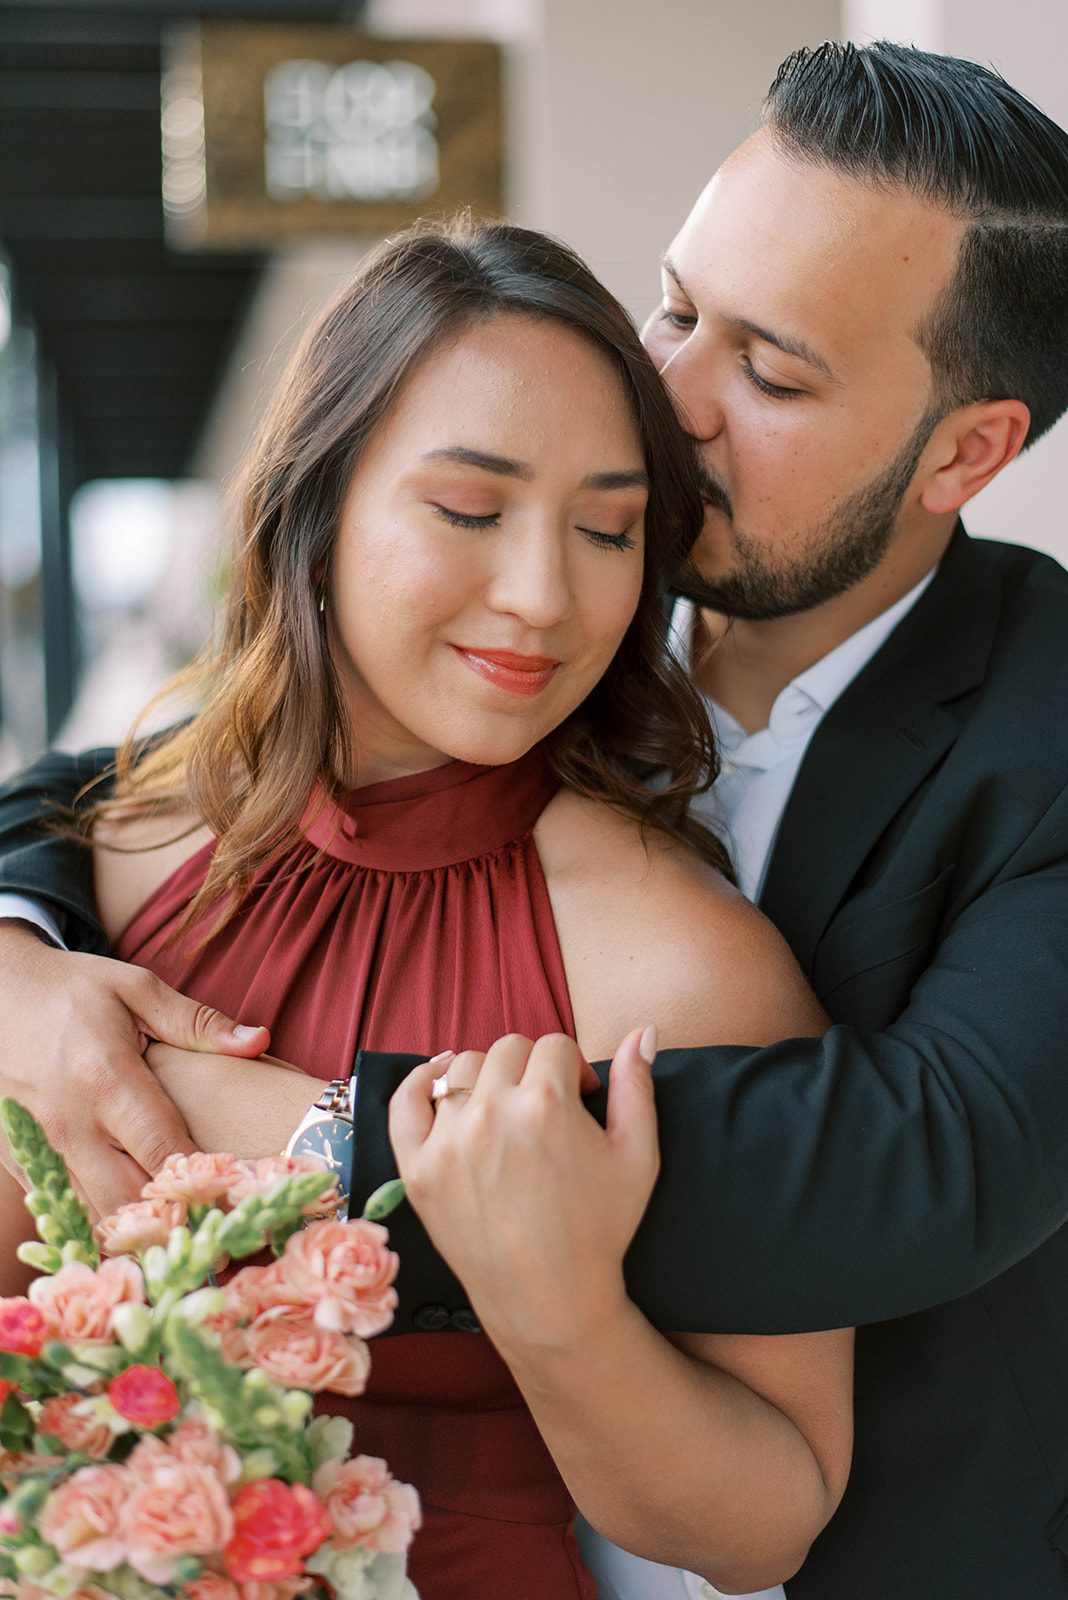 man standing behind his fiance with his arms around her shoulders and kissing her on the head as she holds his arm and smiles while looking down